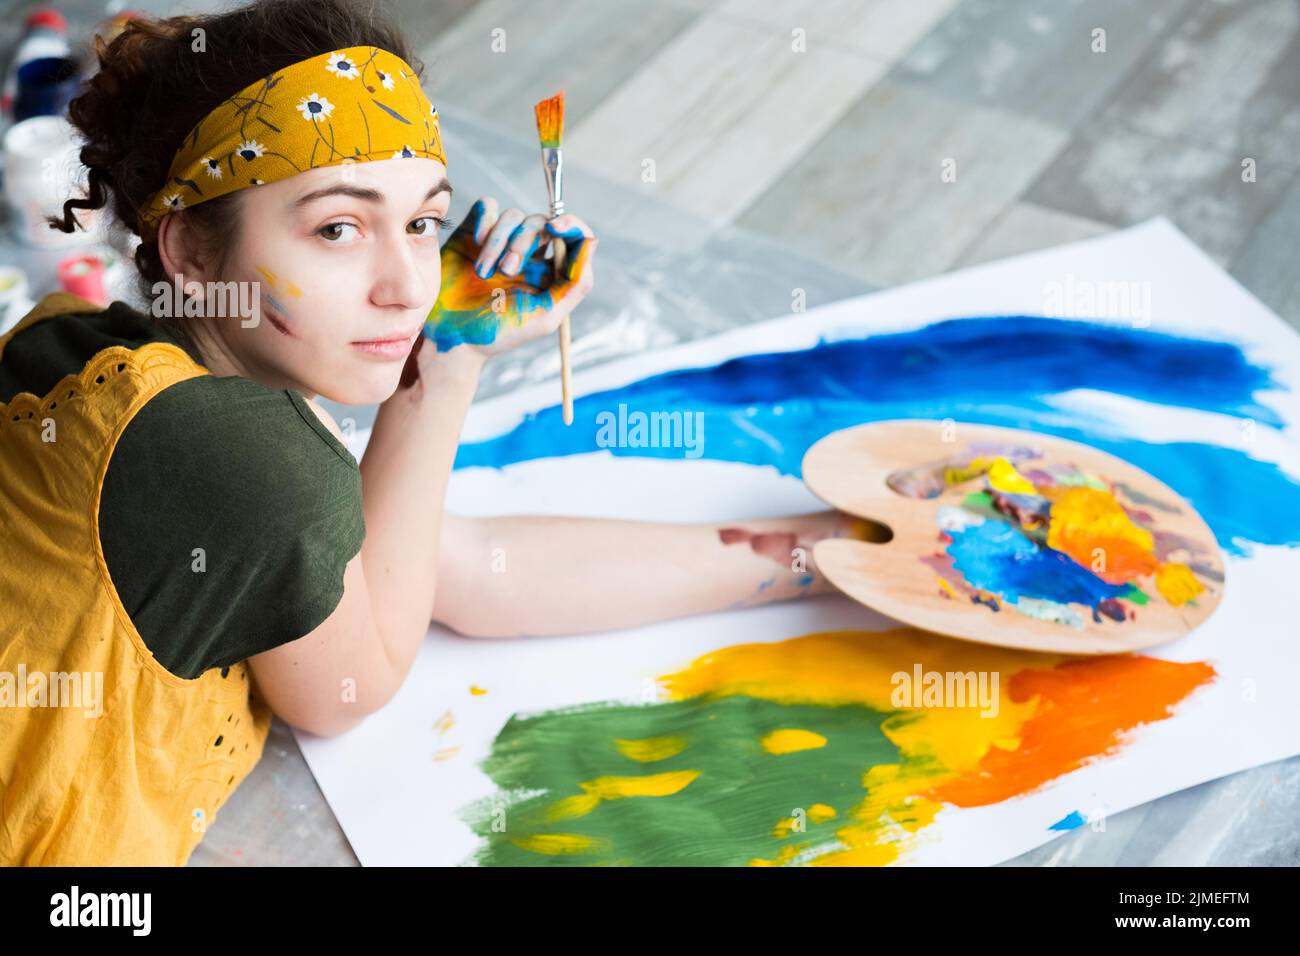 fine art hobby talented painter abstract artwork Stock Photo